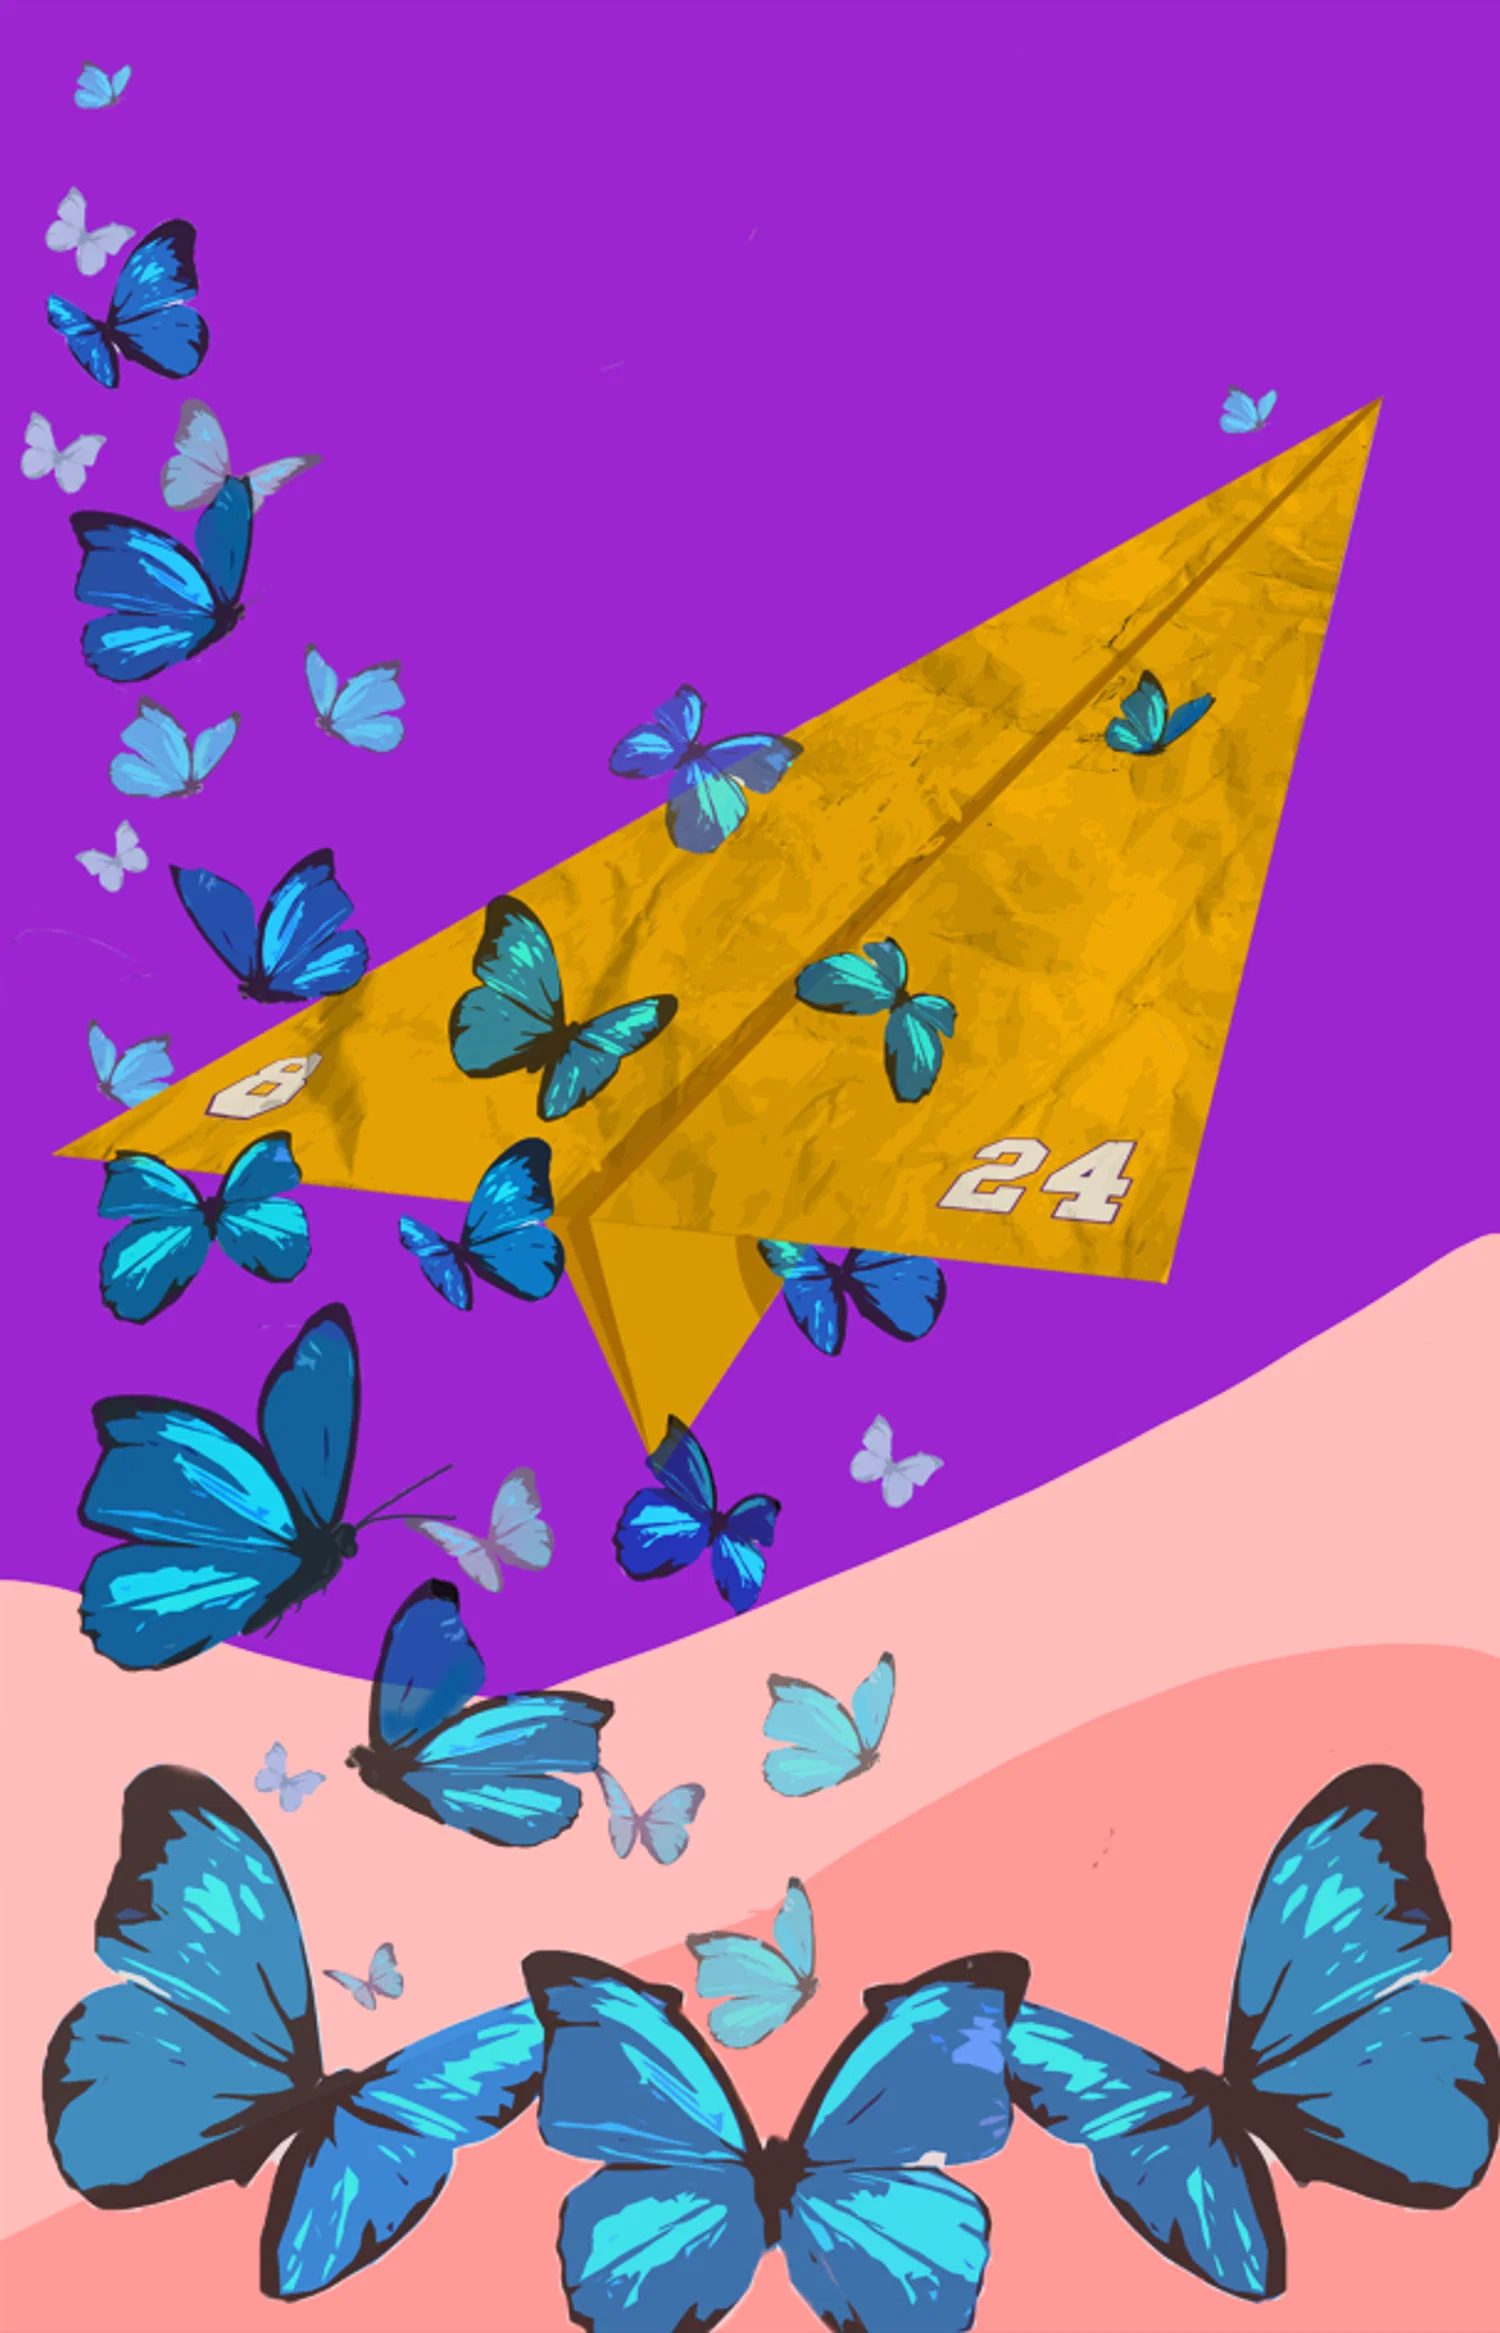 a concept for a mural panel. A yellow paper plane representing Kobe Bryant, flying through a blue butterfly's